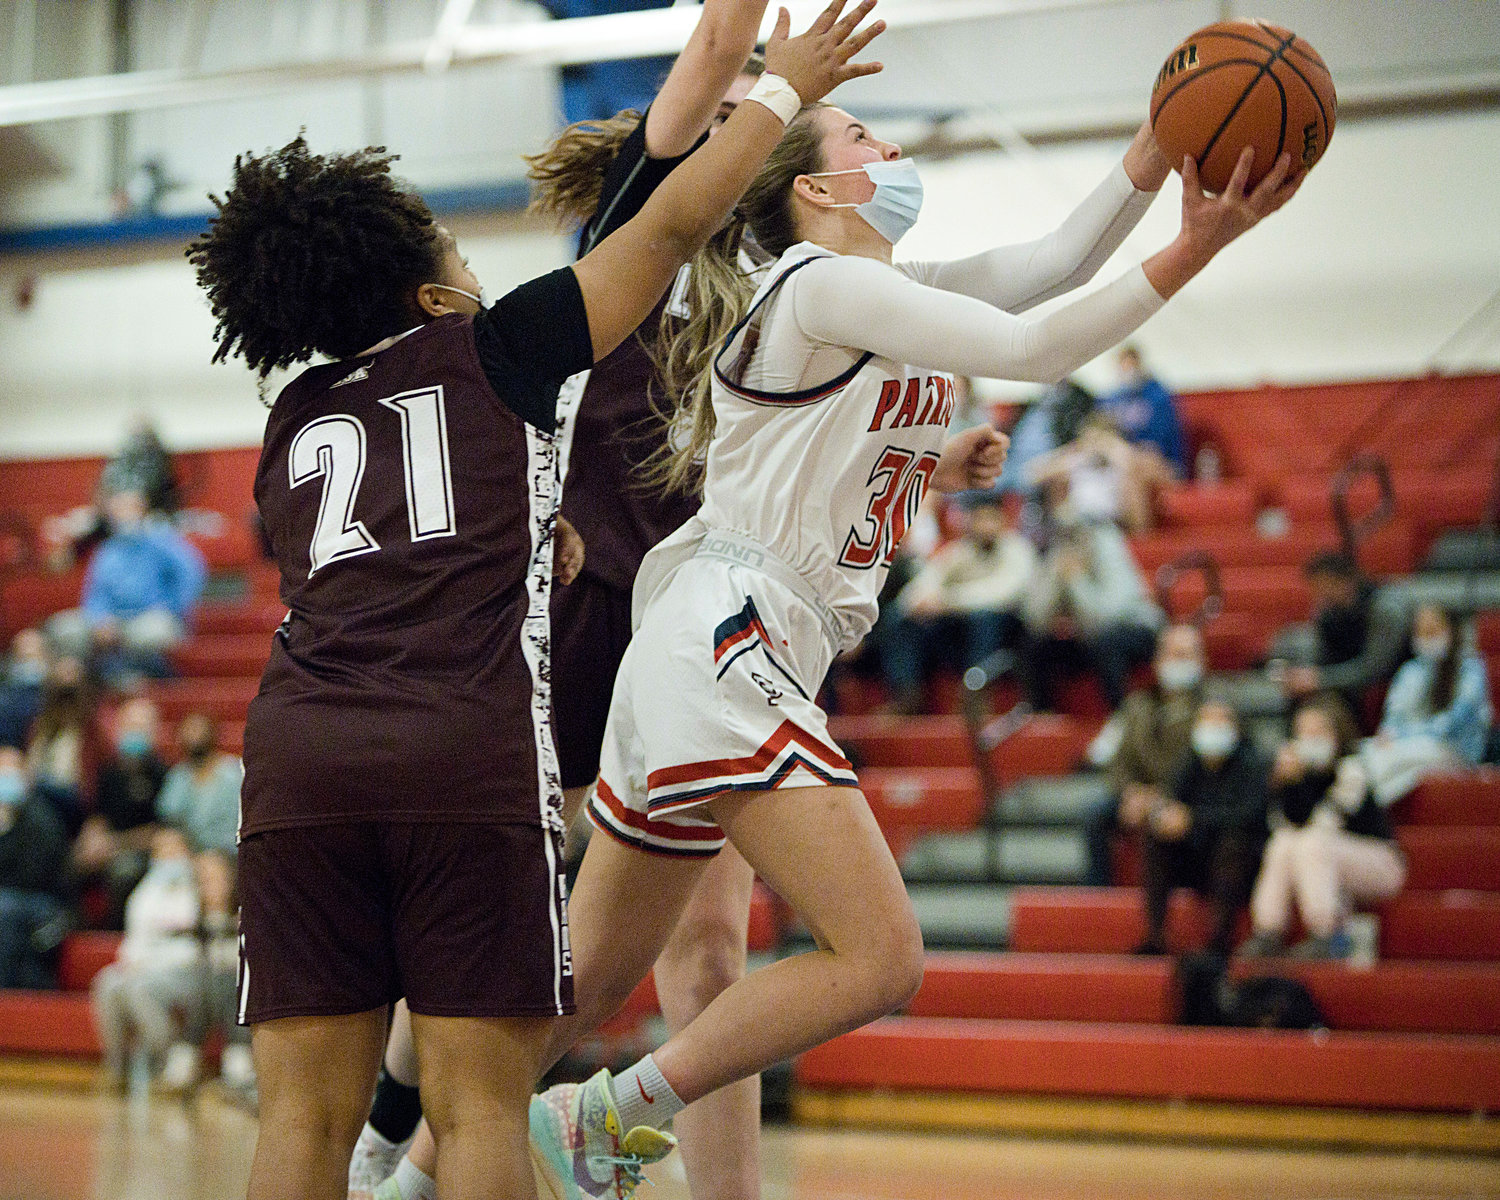 Ava Hackley splits a pair of La Salle opponents while going in for a layup.